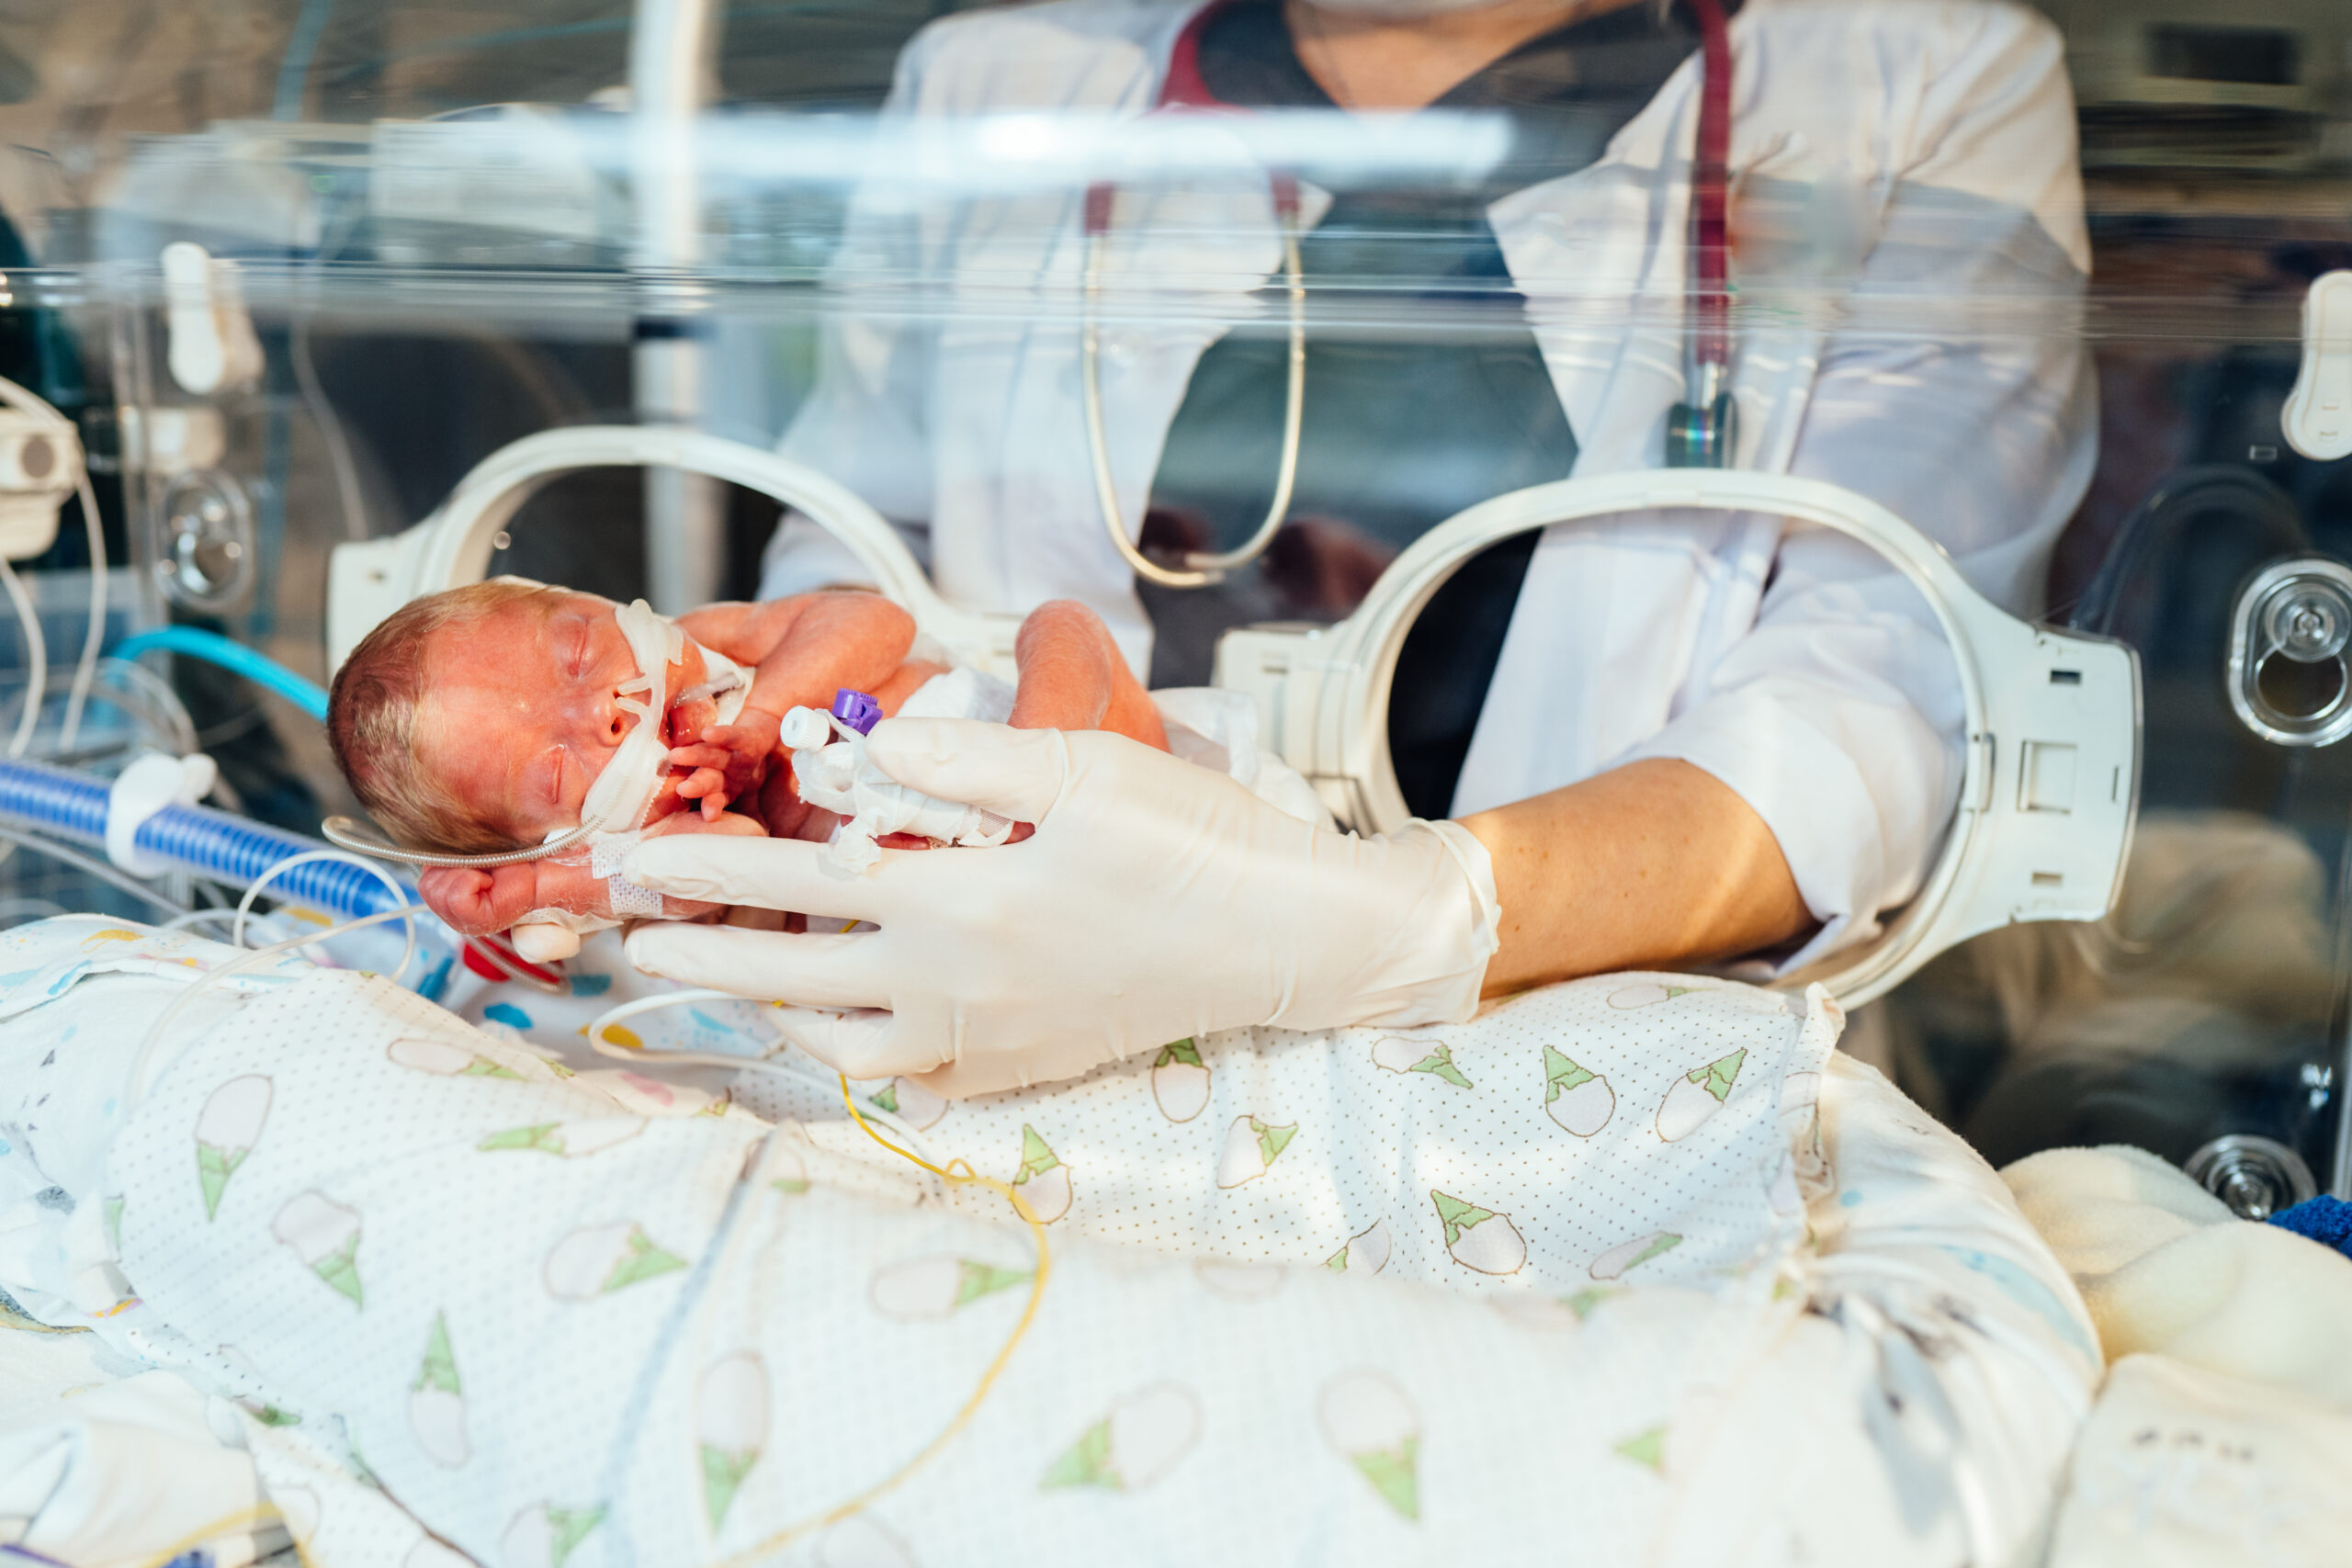 Unrecognizable nurse in white gloves takes action and care for premature baby, selective focus on baby eye. Newborn is placed in the incubator. Neonatal intensive care unit.